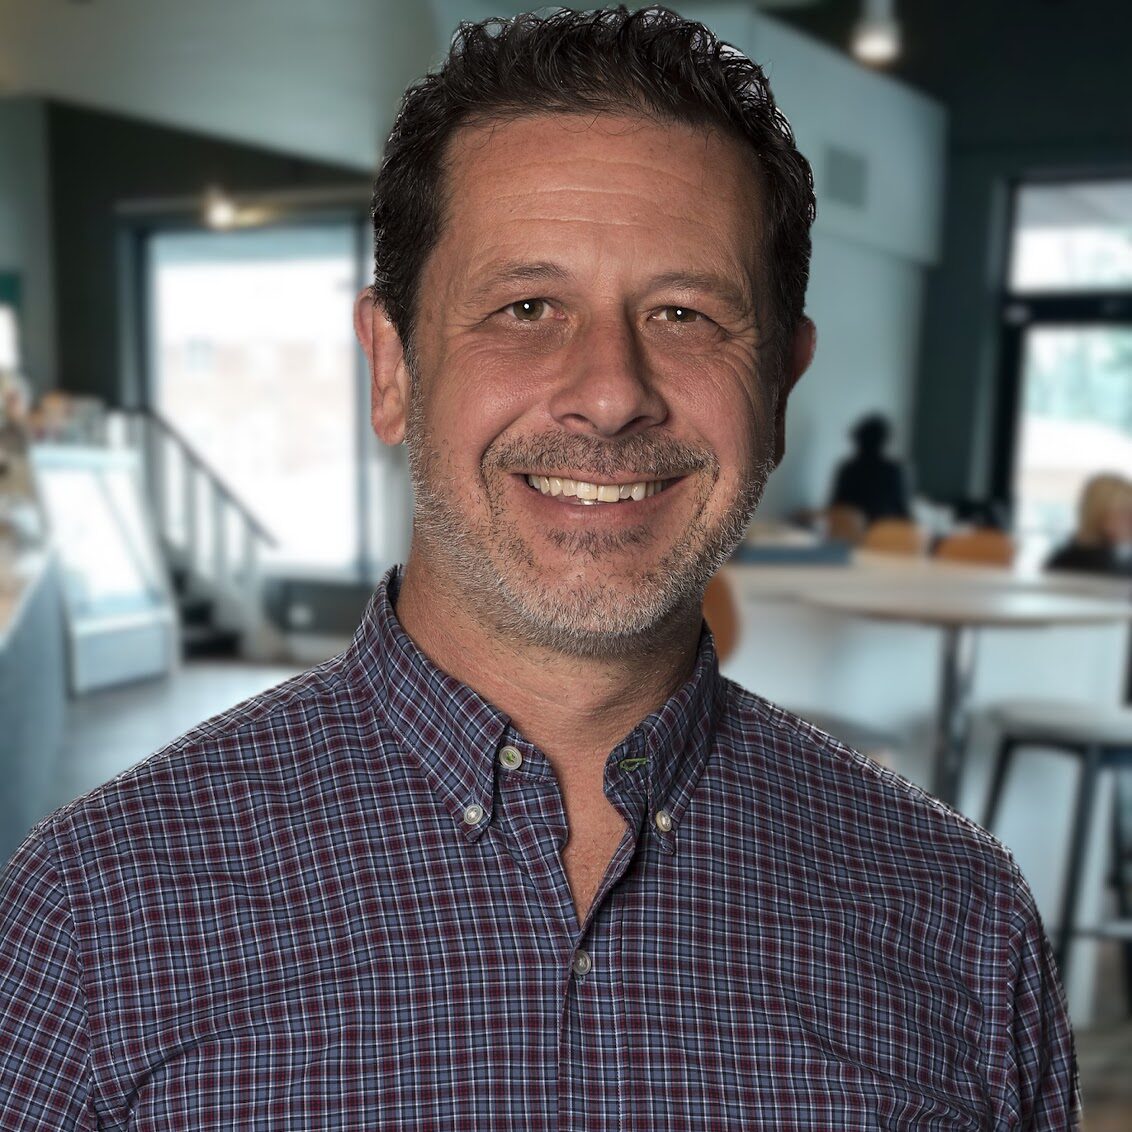 Headshot of Todd M Smith smiling in a coffee shop.